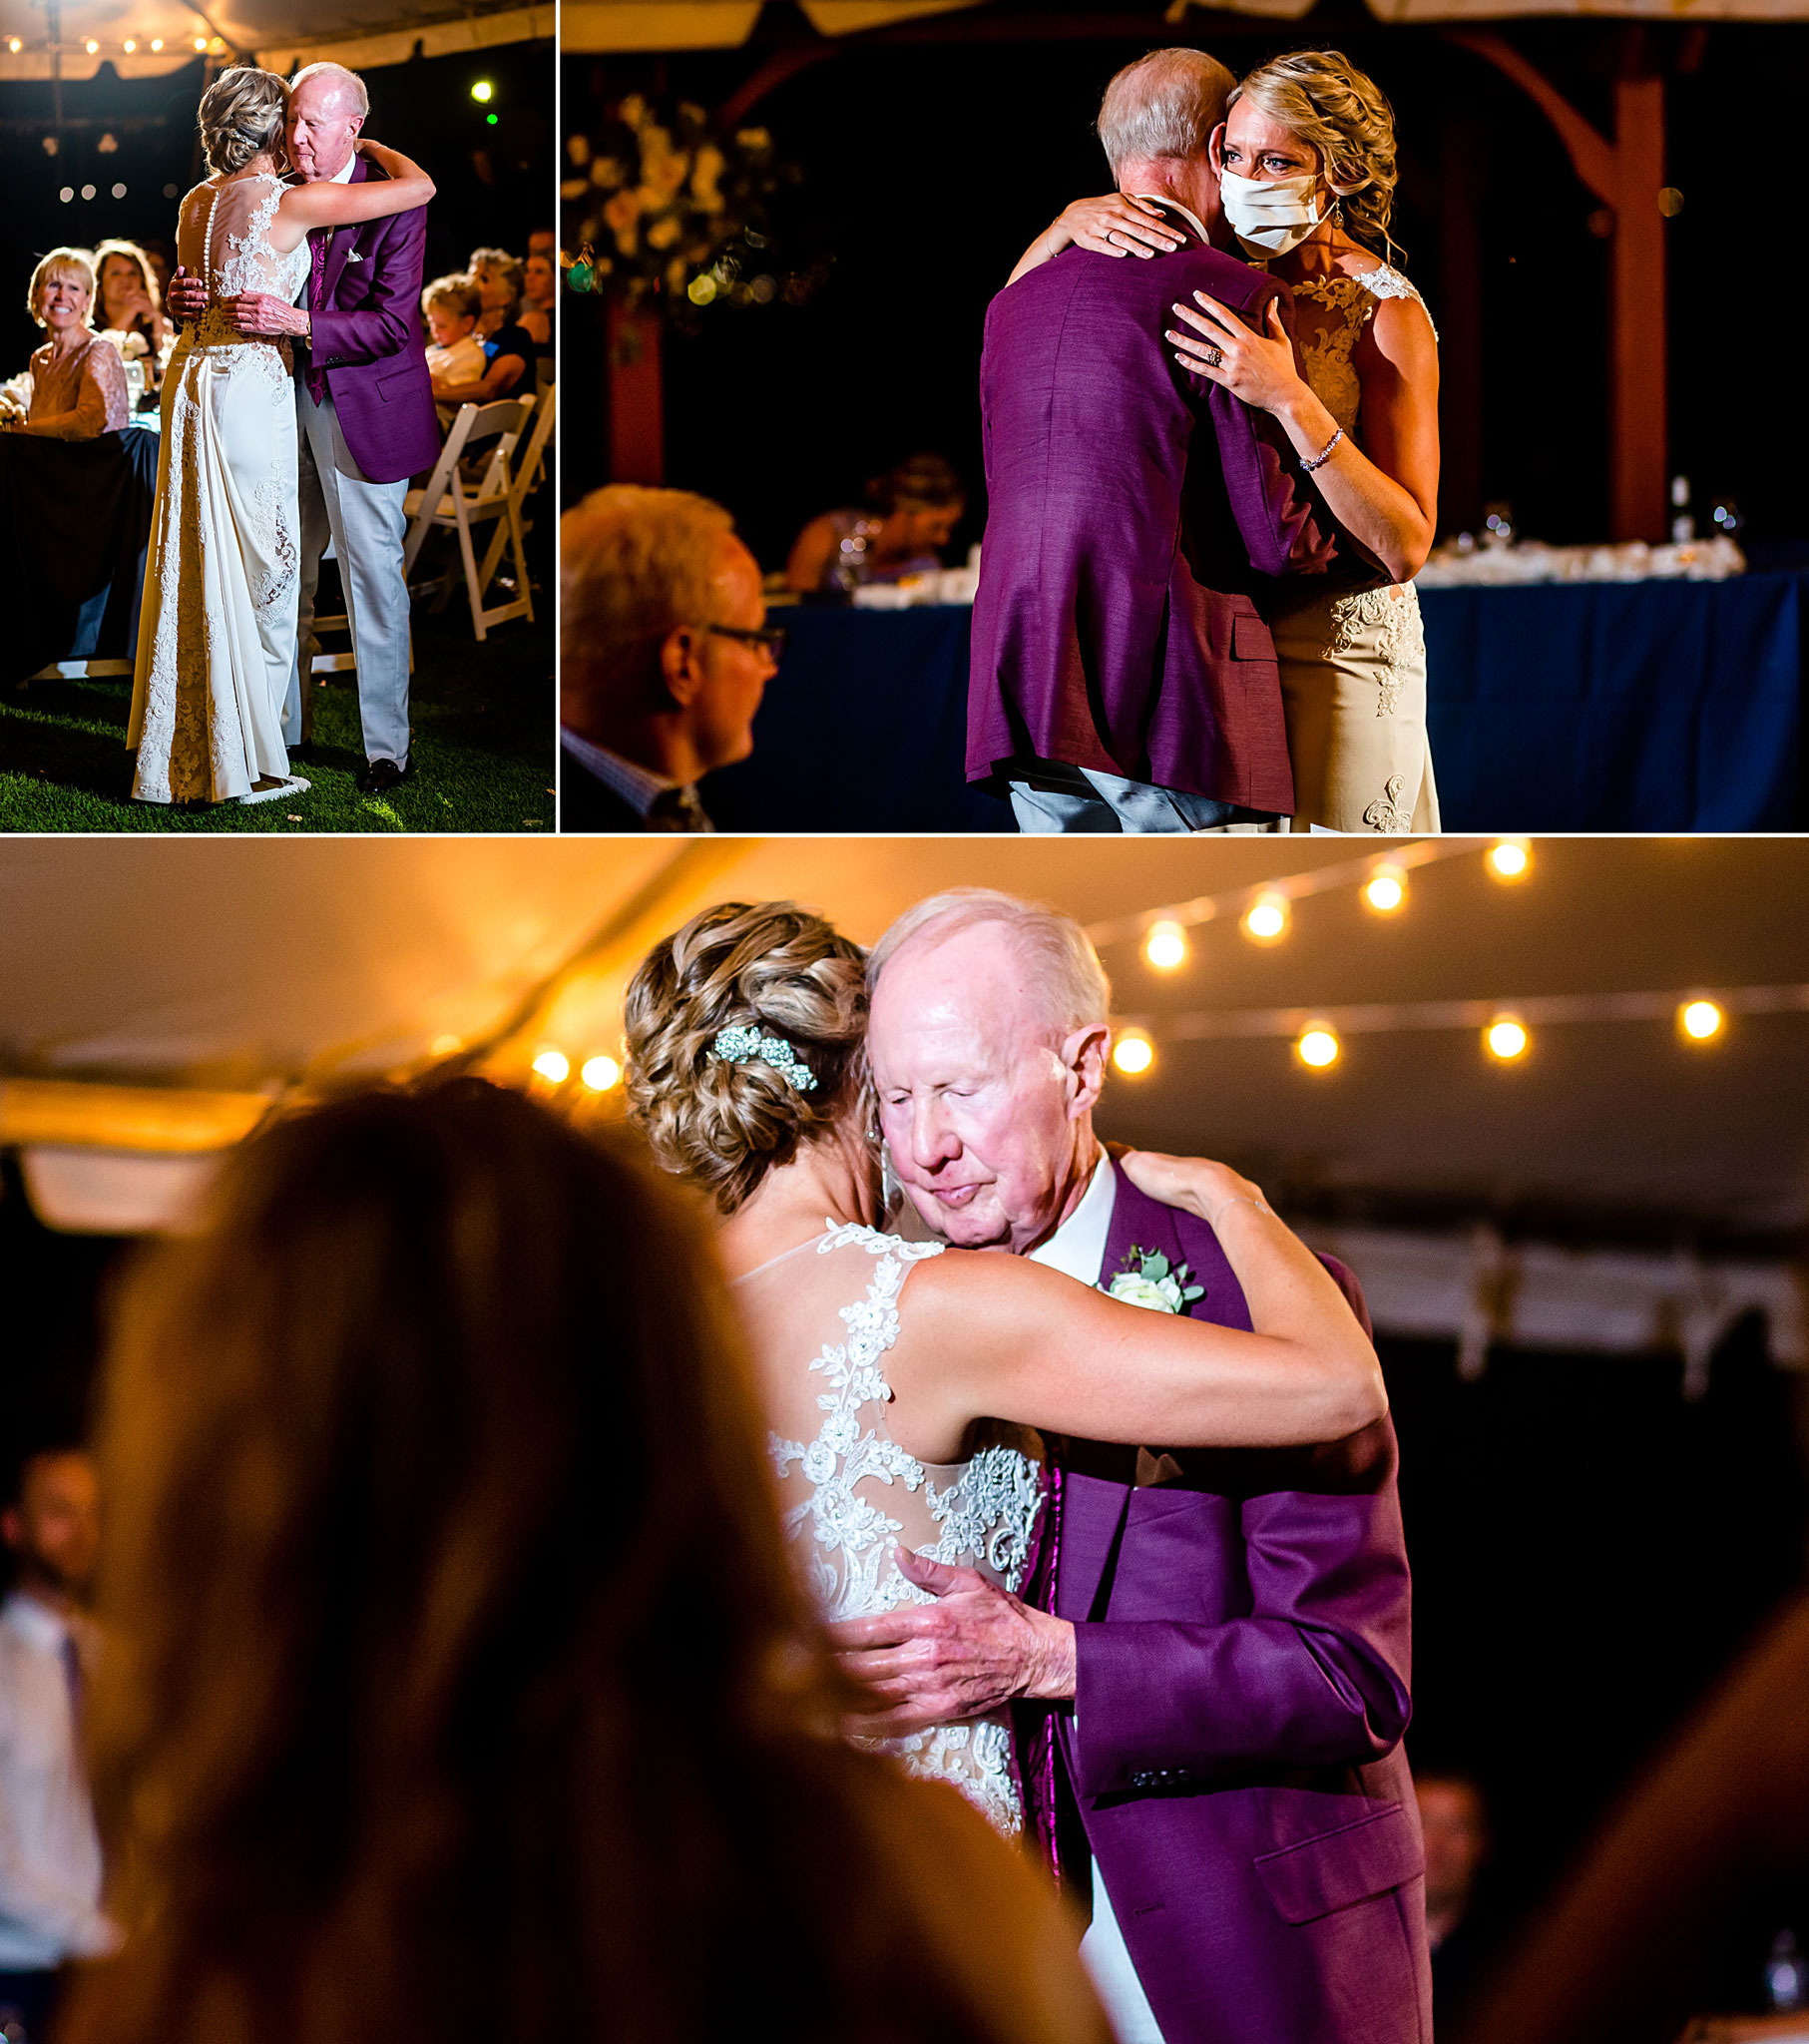 Bride dancing with her grandfather. Kelli & Jason's golf course wedding at The Ranch Country Club by Colorado Wedding Photographer Jennifer Garza, Small wedding ideas, Intimate wedding, Golf Course Wedding, Country Club Wedding, Summer Wedding, Golf Wedding, Wedding planning, Colorado Wedding Photographer, Colorado Elopement Photographer, Colorado Elopement, Colorado Wedding, Denver Wedding Photographer, Denver Wedding, Wedding Inspiration, Summer Wedding Inspiration, Covid Wedding